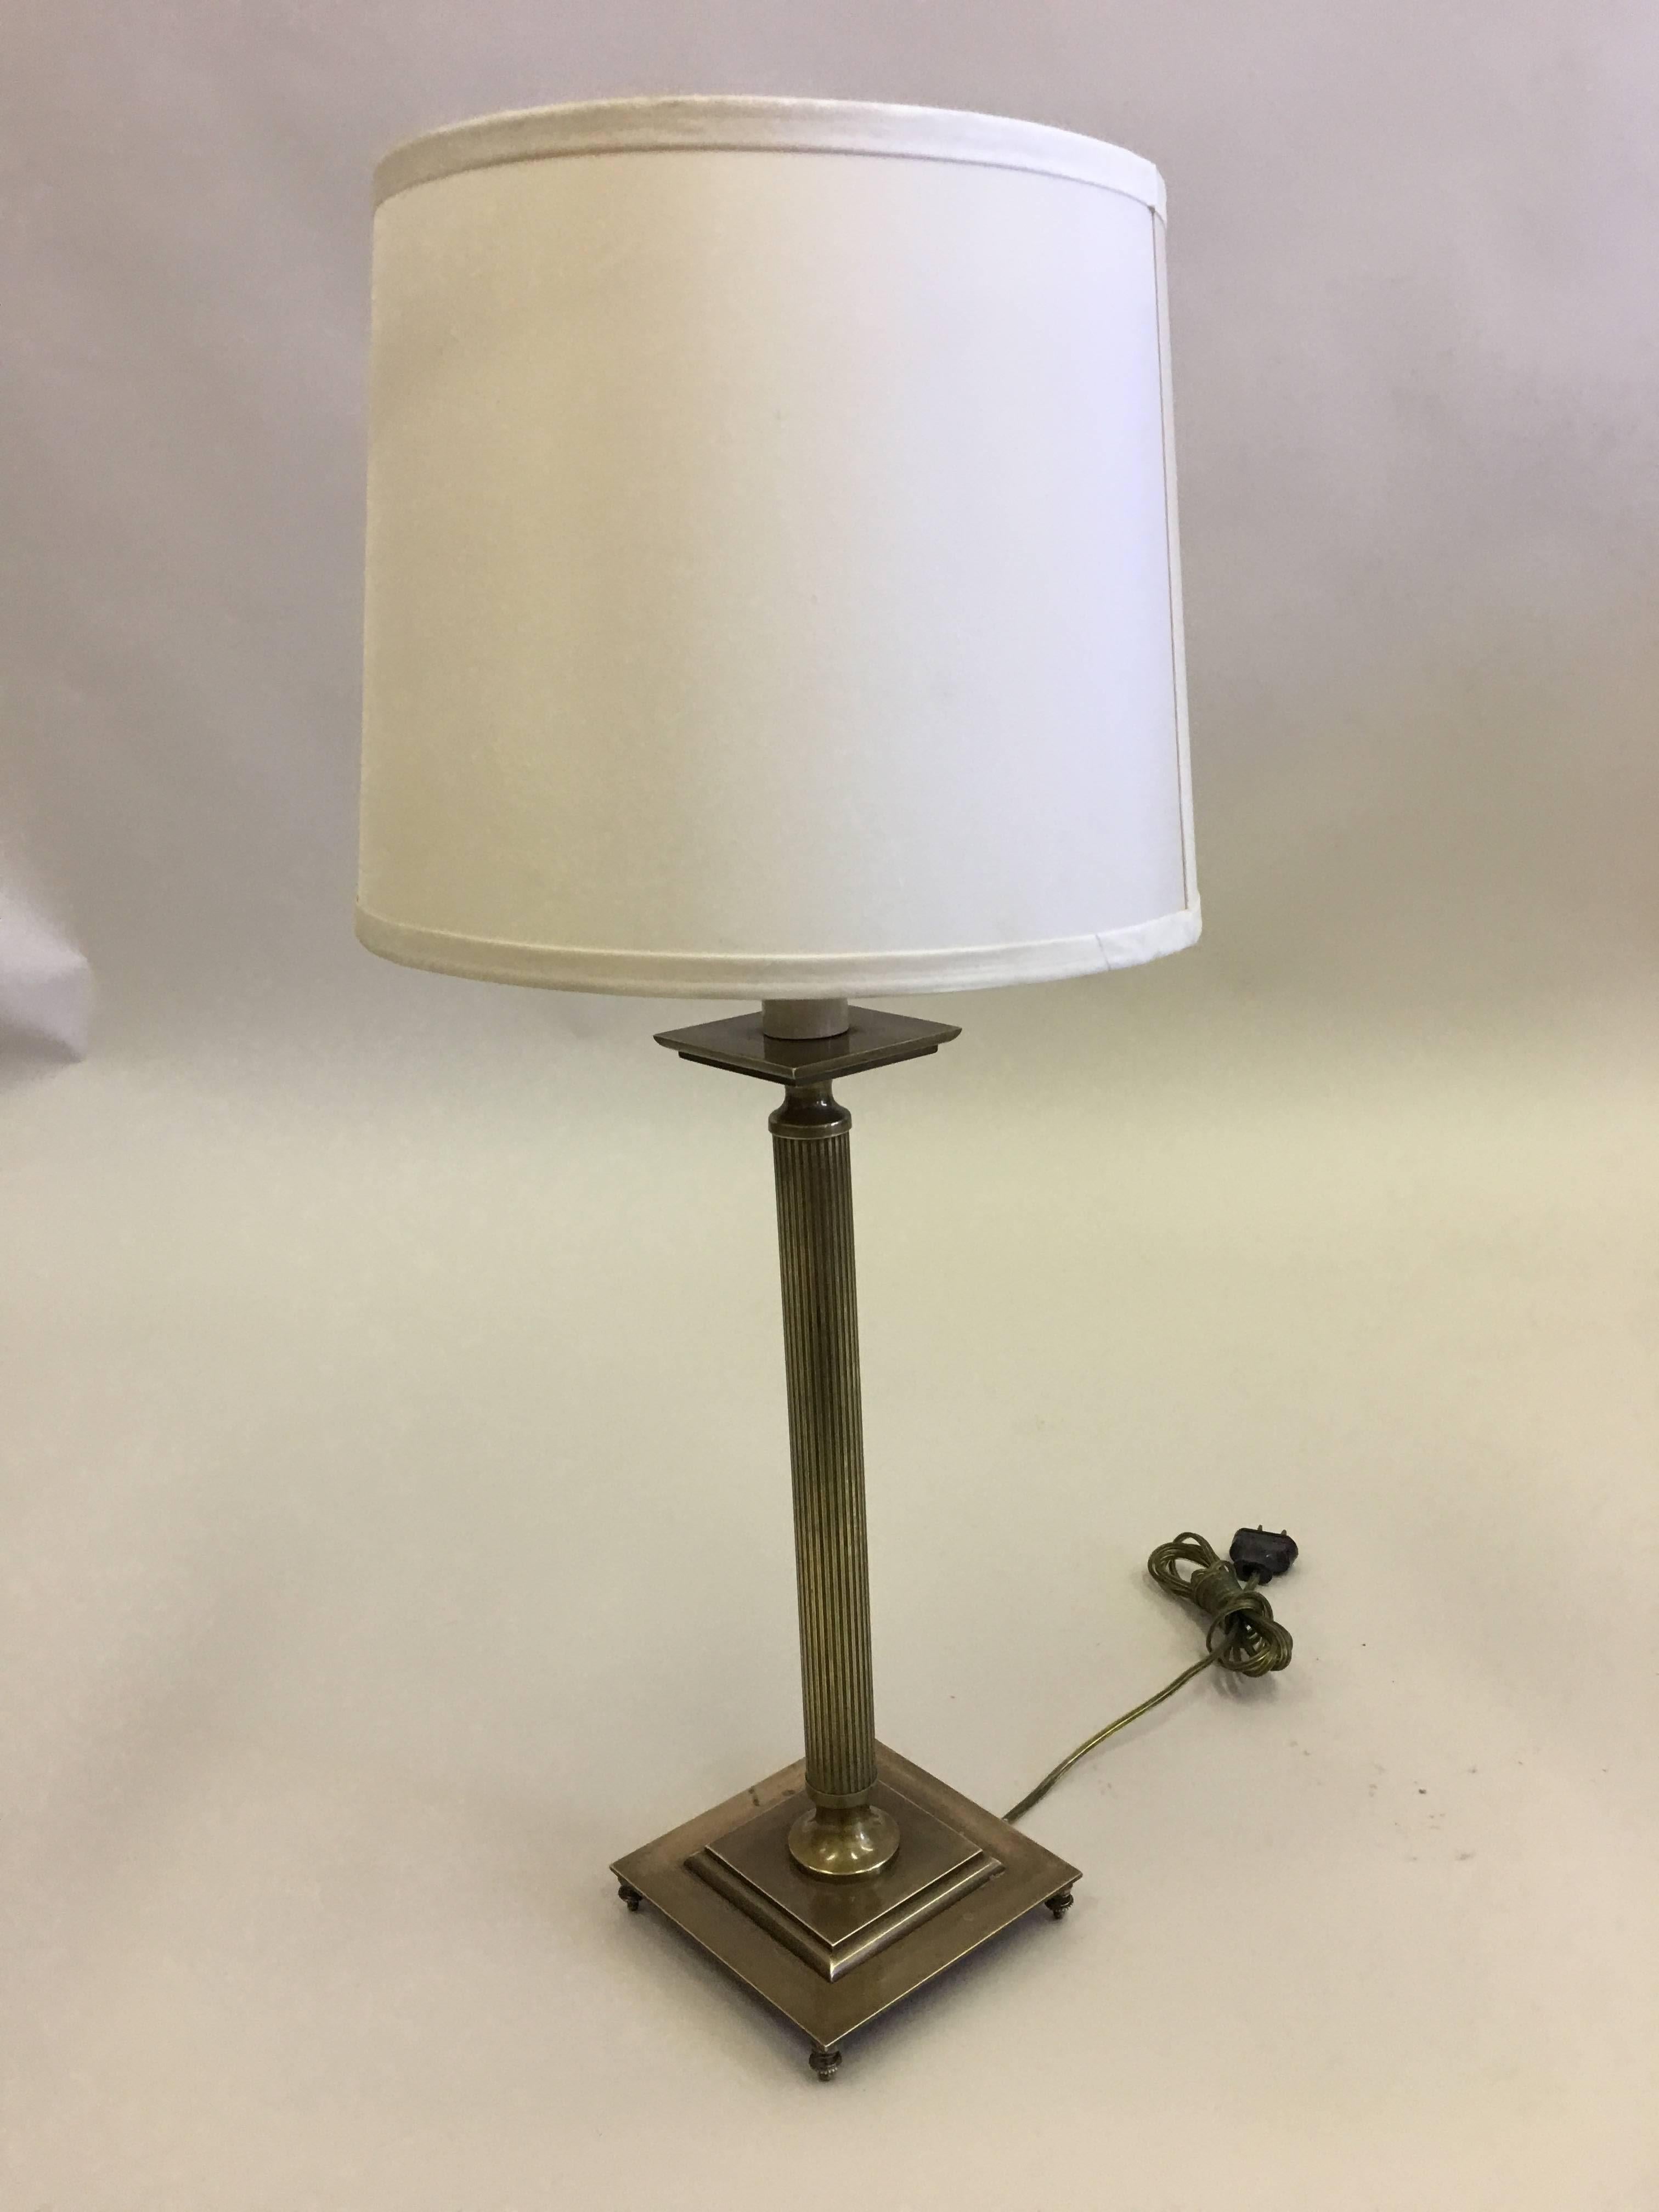 Elegant pair of French solid brass table lamps in the modern neoclassical tradition with fluted brass stems and raised brass square base resting on delicate brass finials. The pieces have a naturally aged antique brass patina. Shades are for